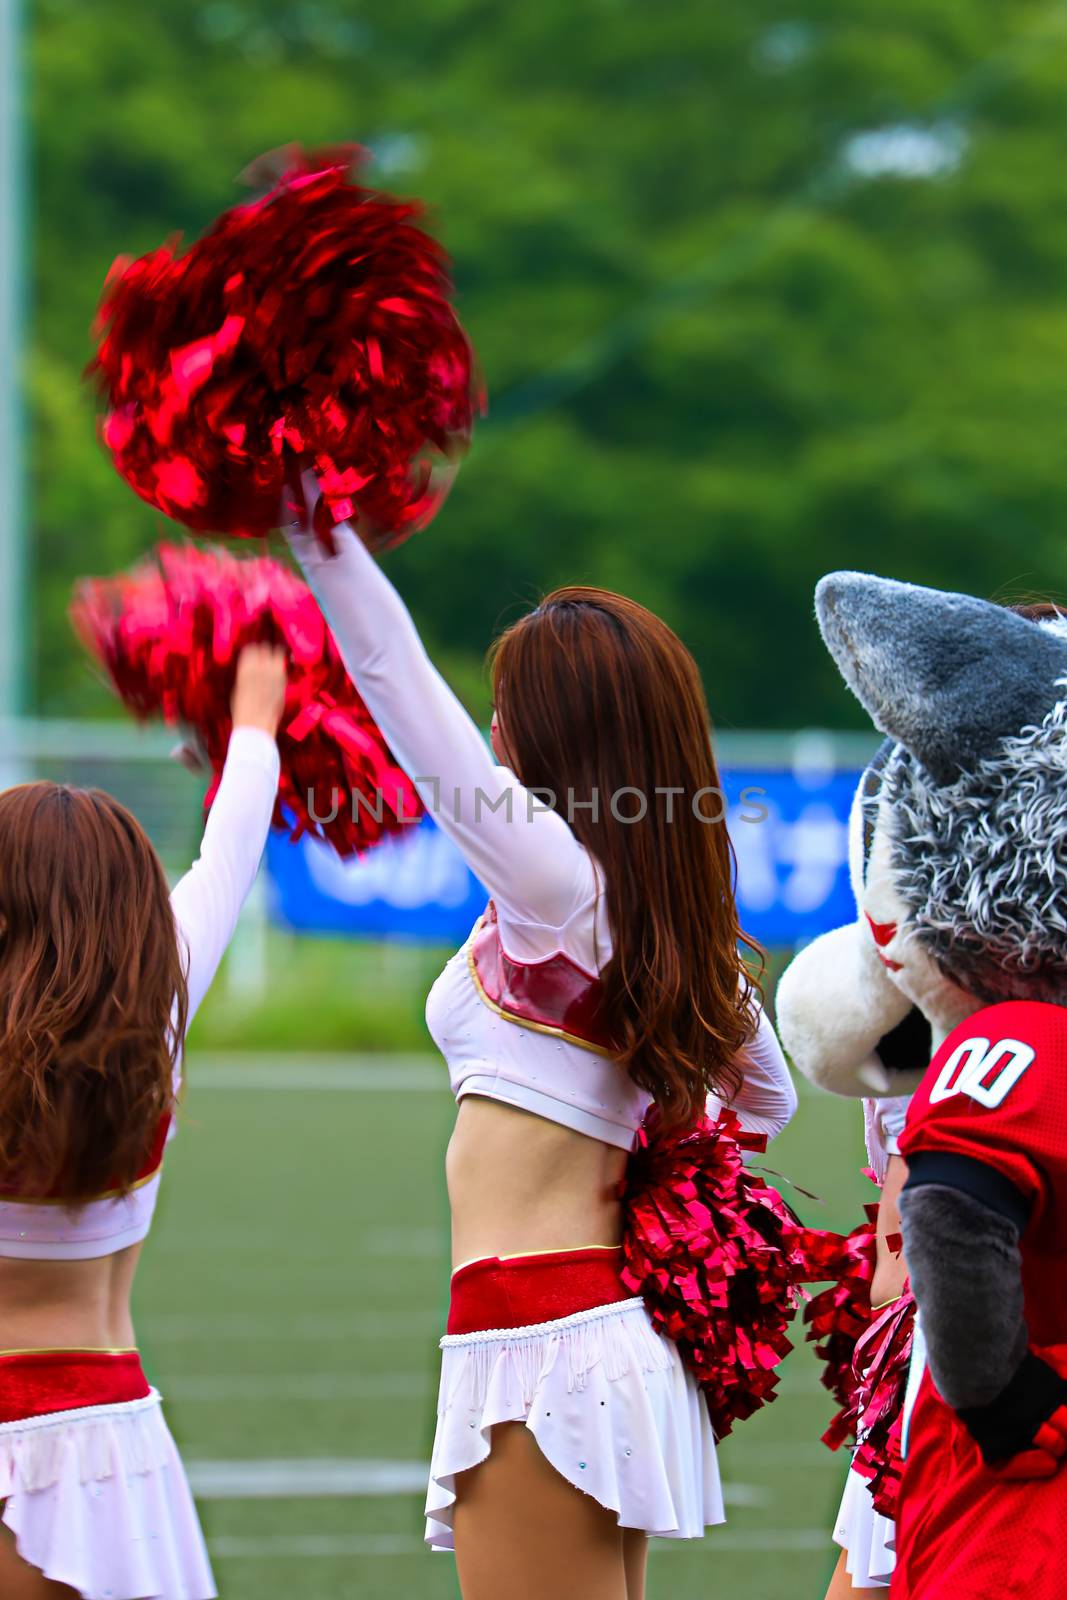 Watching a game Supporting scenery.Cheerleaders in Uniform Holding Pom-Poms. by USA-TARO